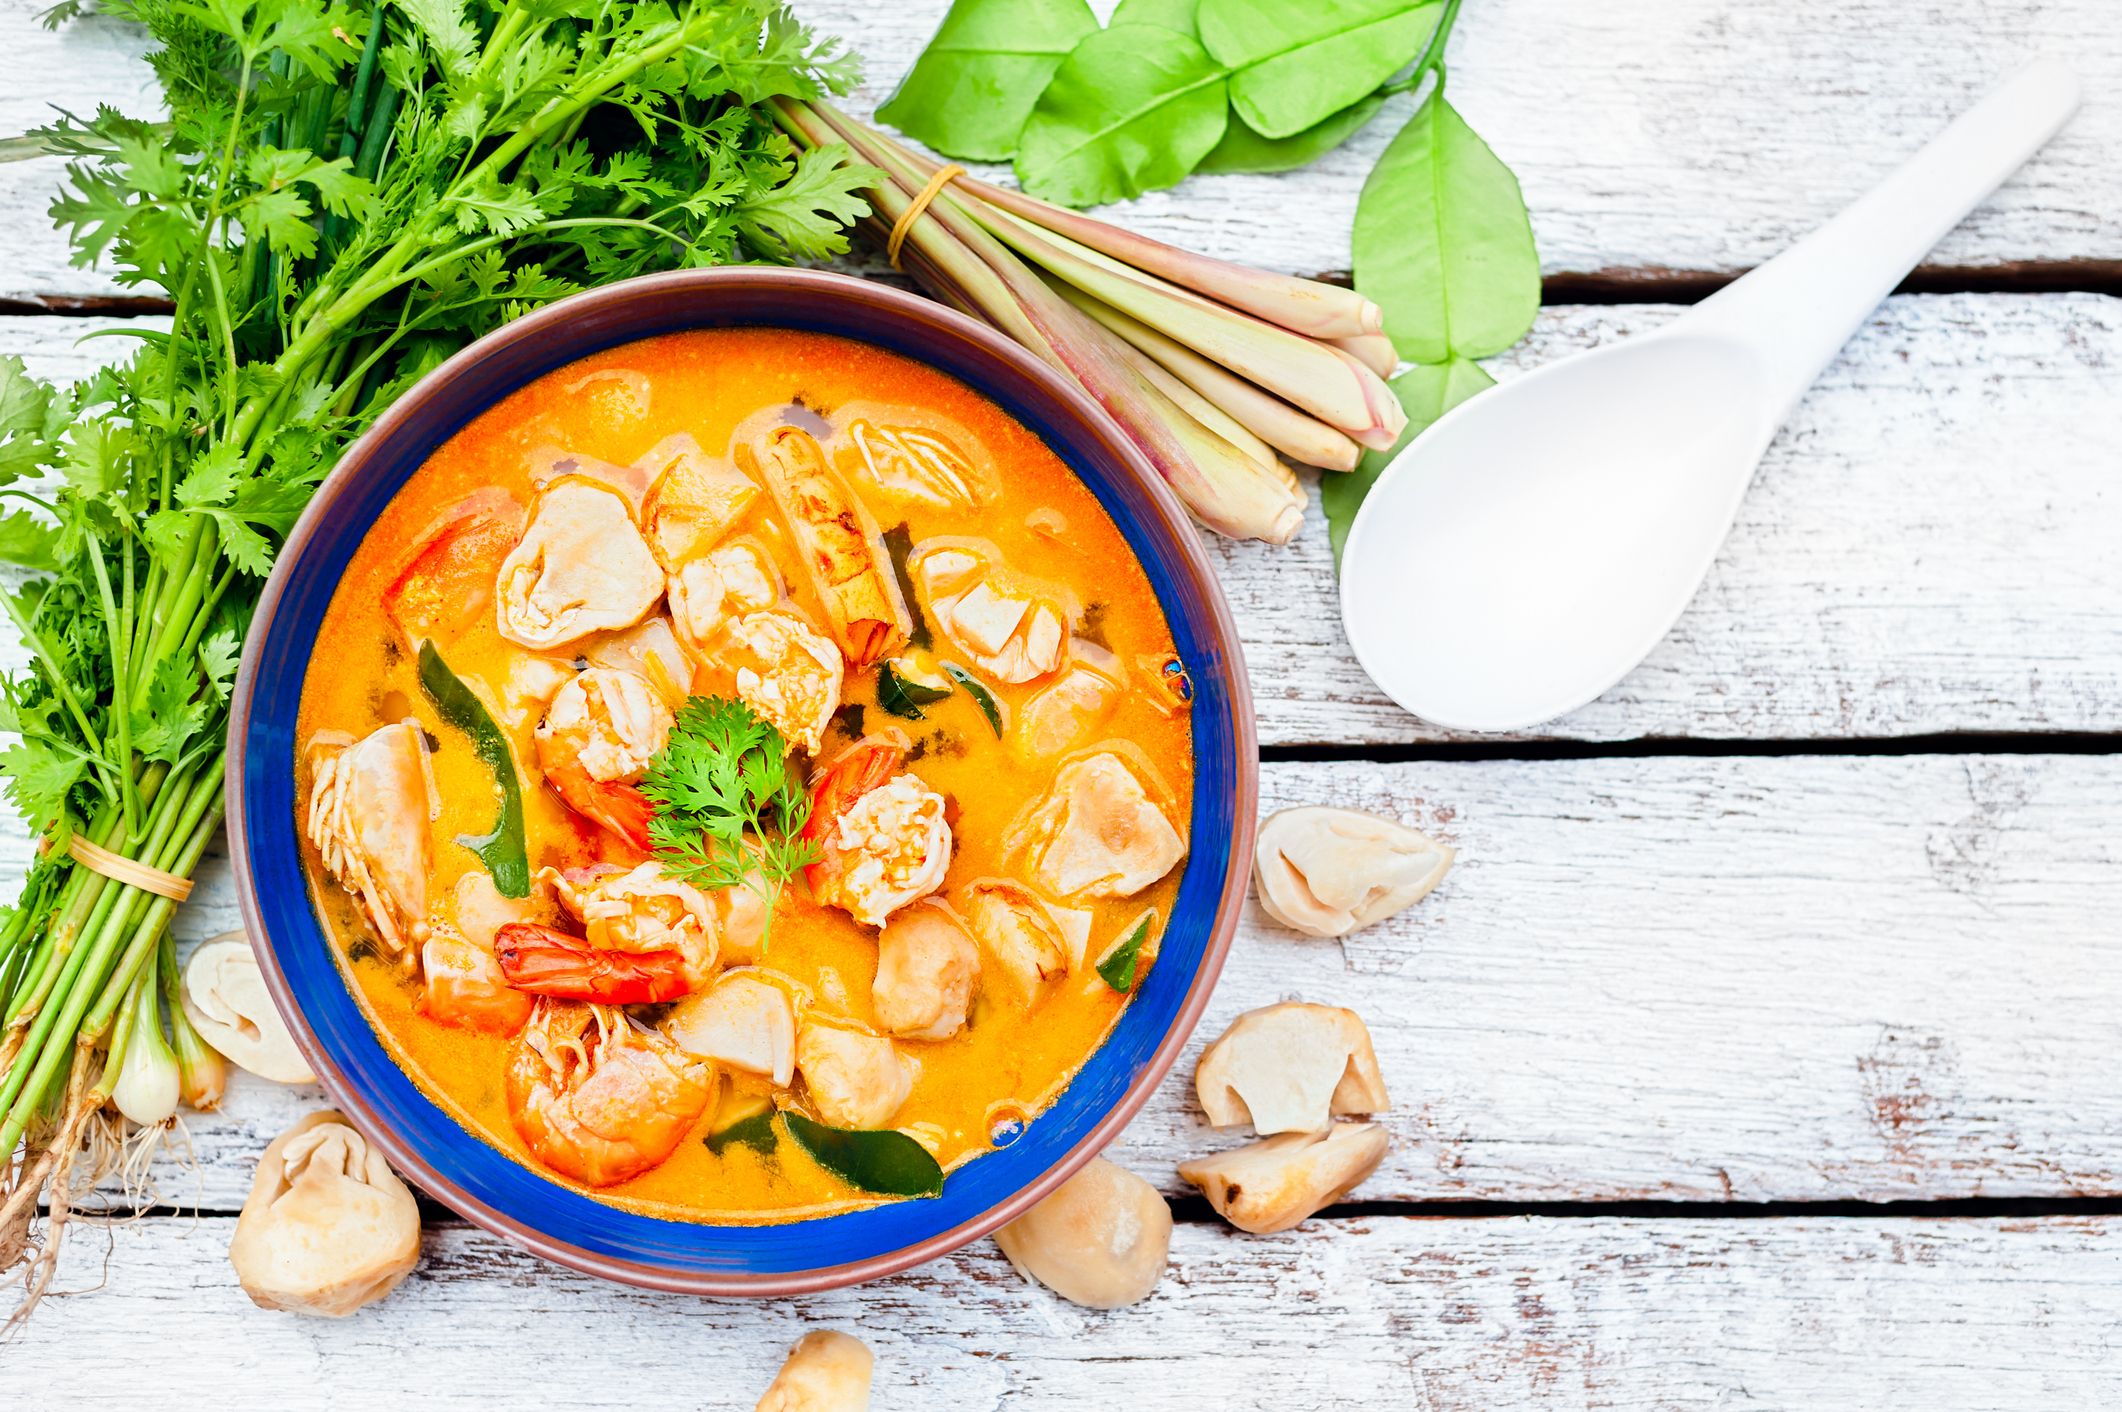 10 Healthiest Thai Food Orders, According To A Nutritionist